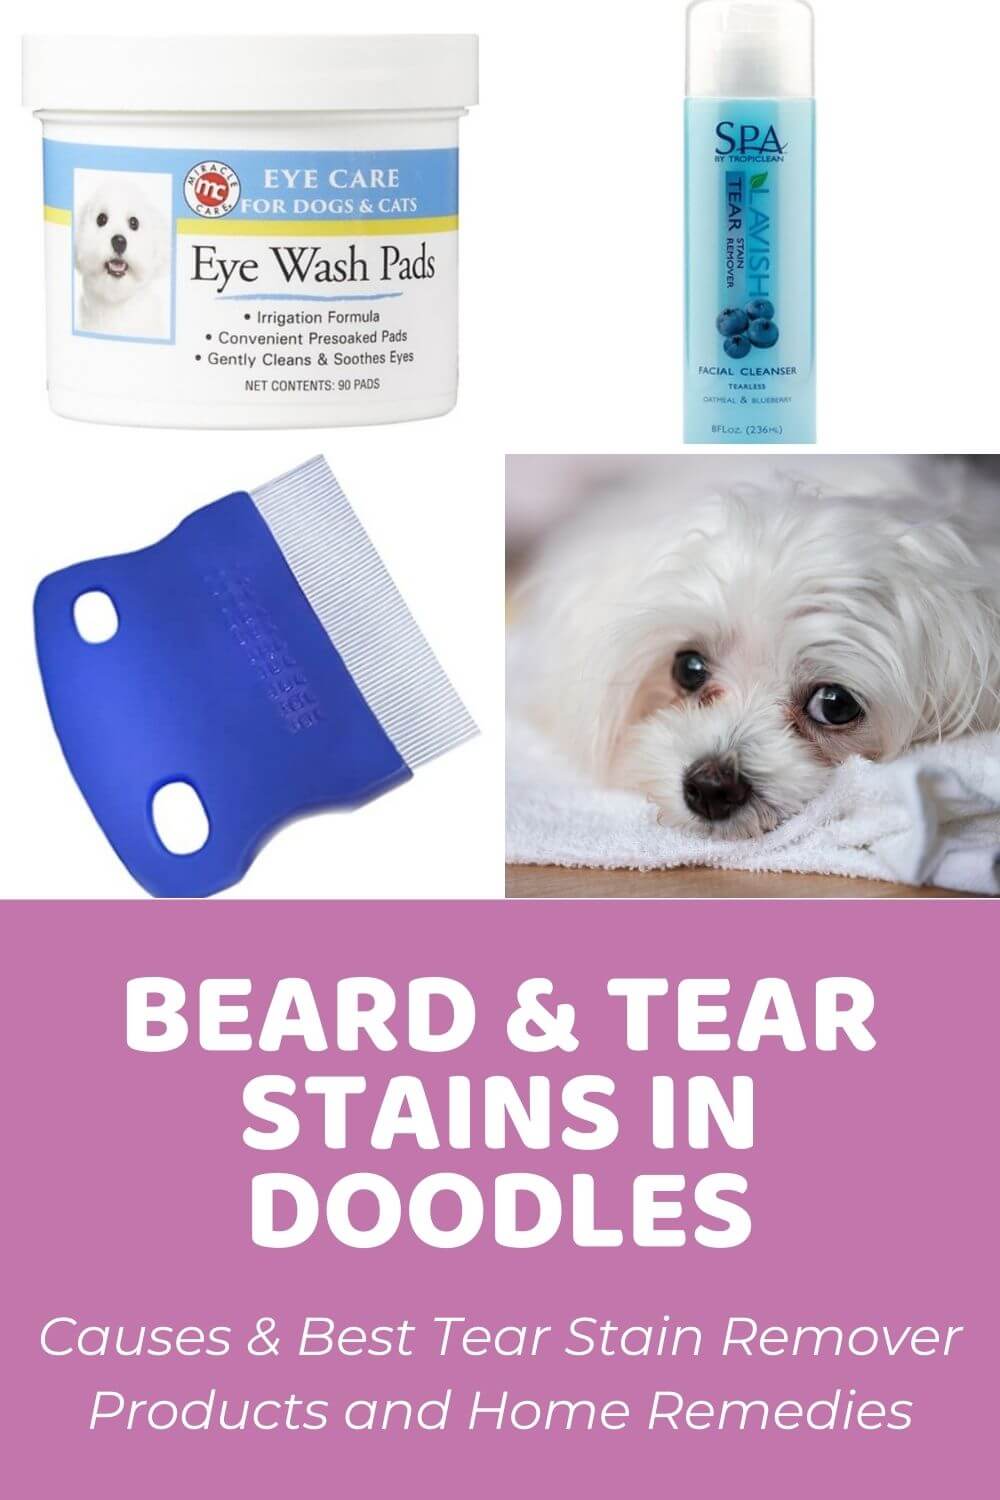 Beard & Tear Stains in Doodles_ Causes & Best Tear Stain Remover